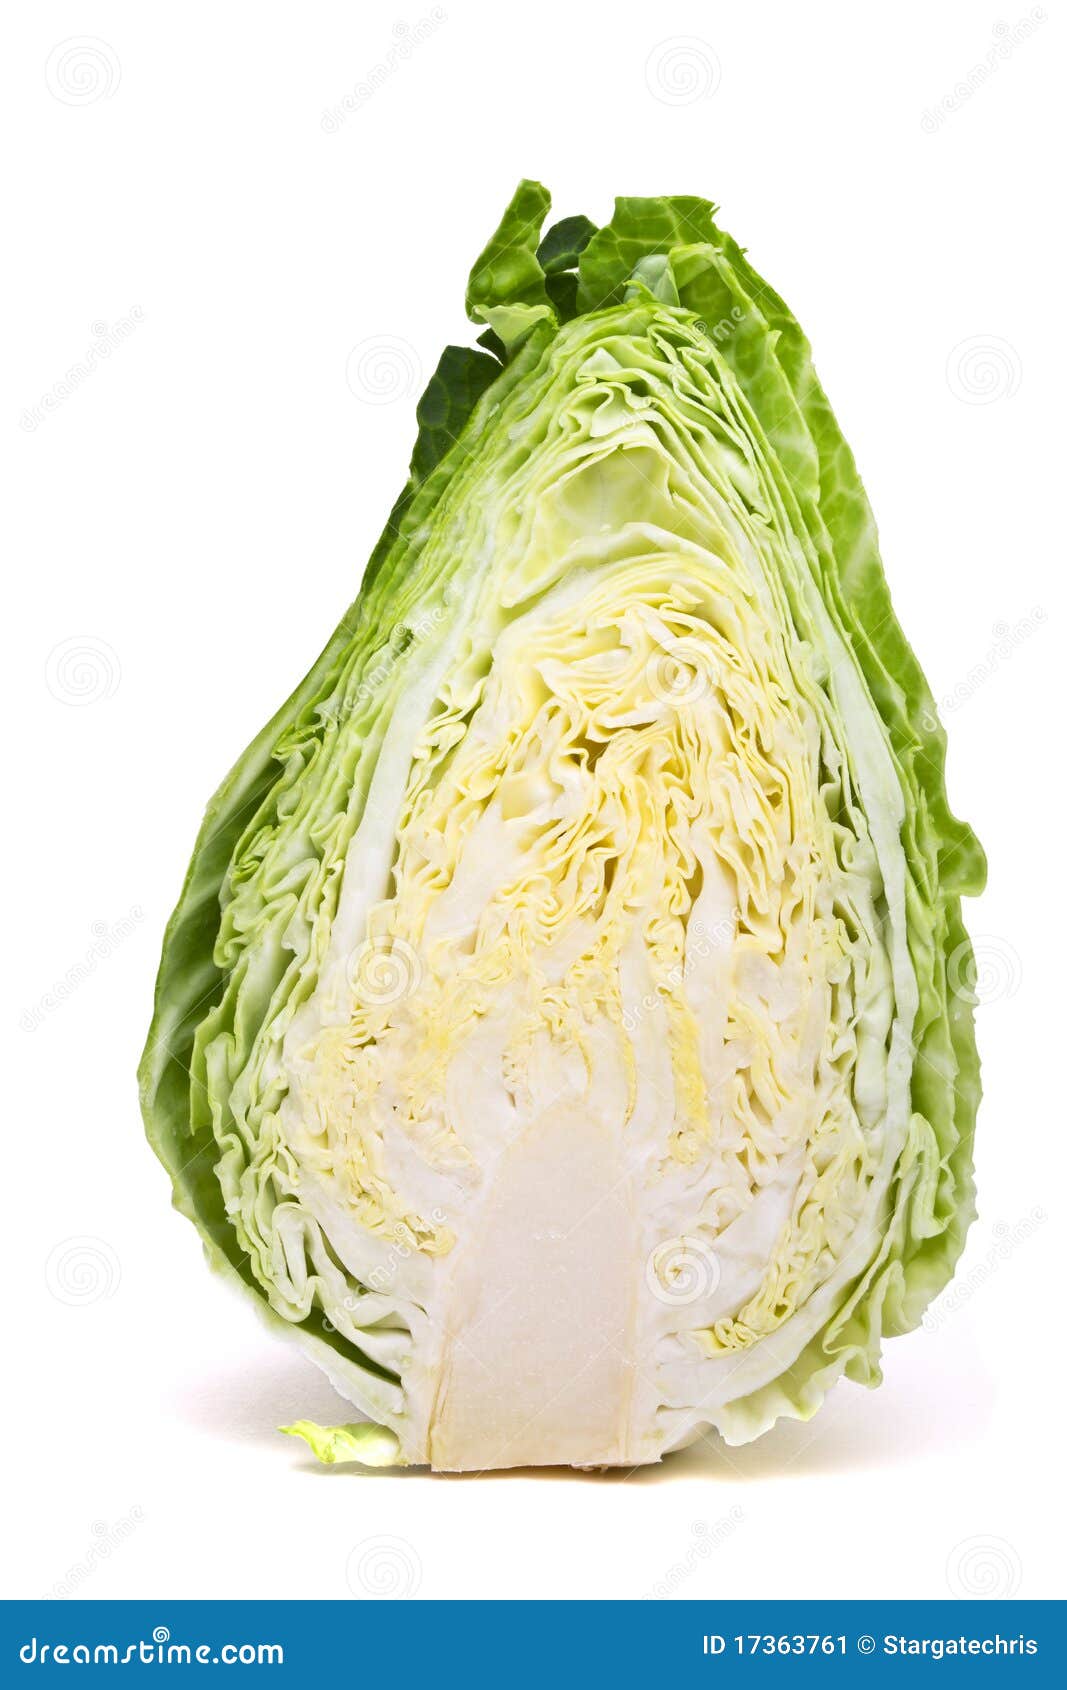 sweetheart cabbage